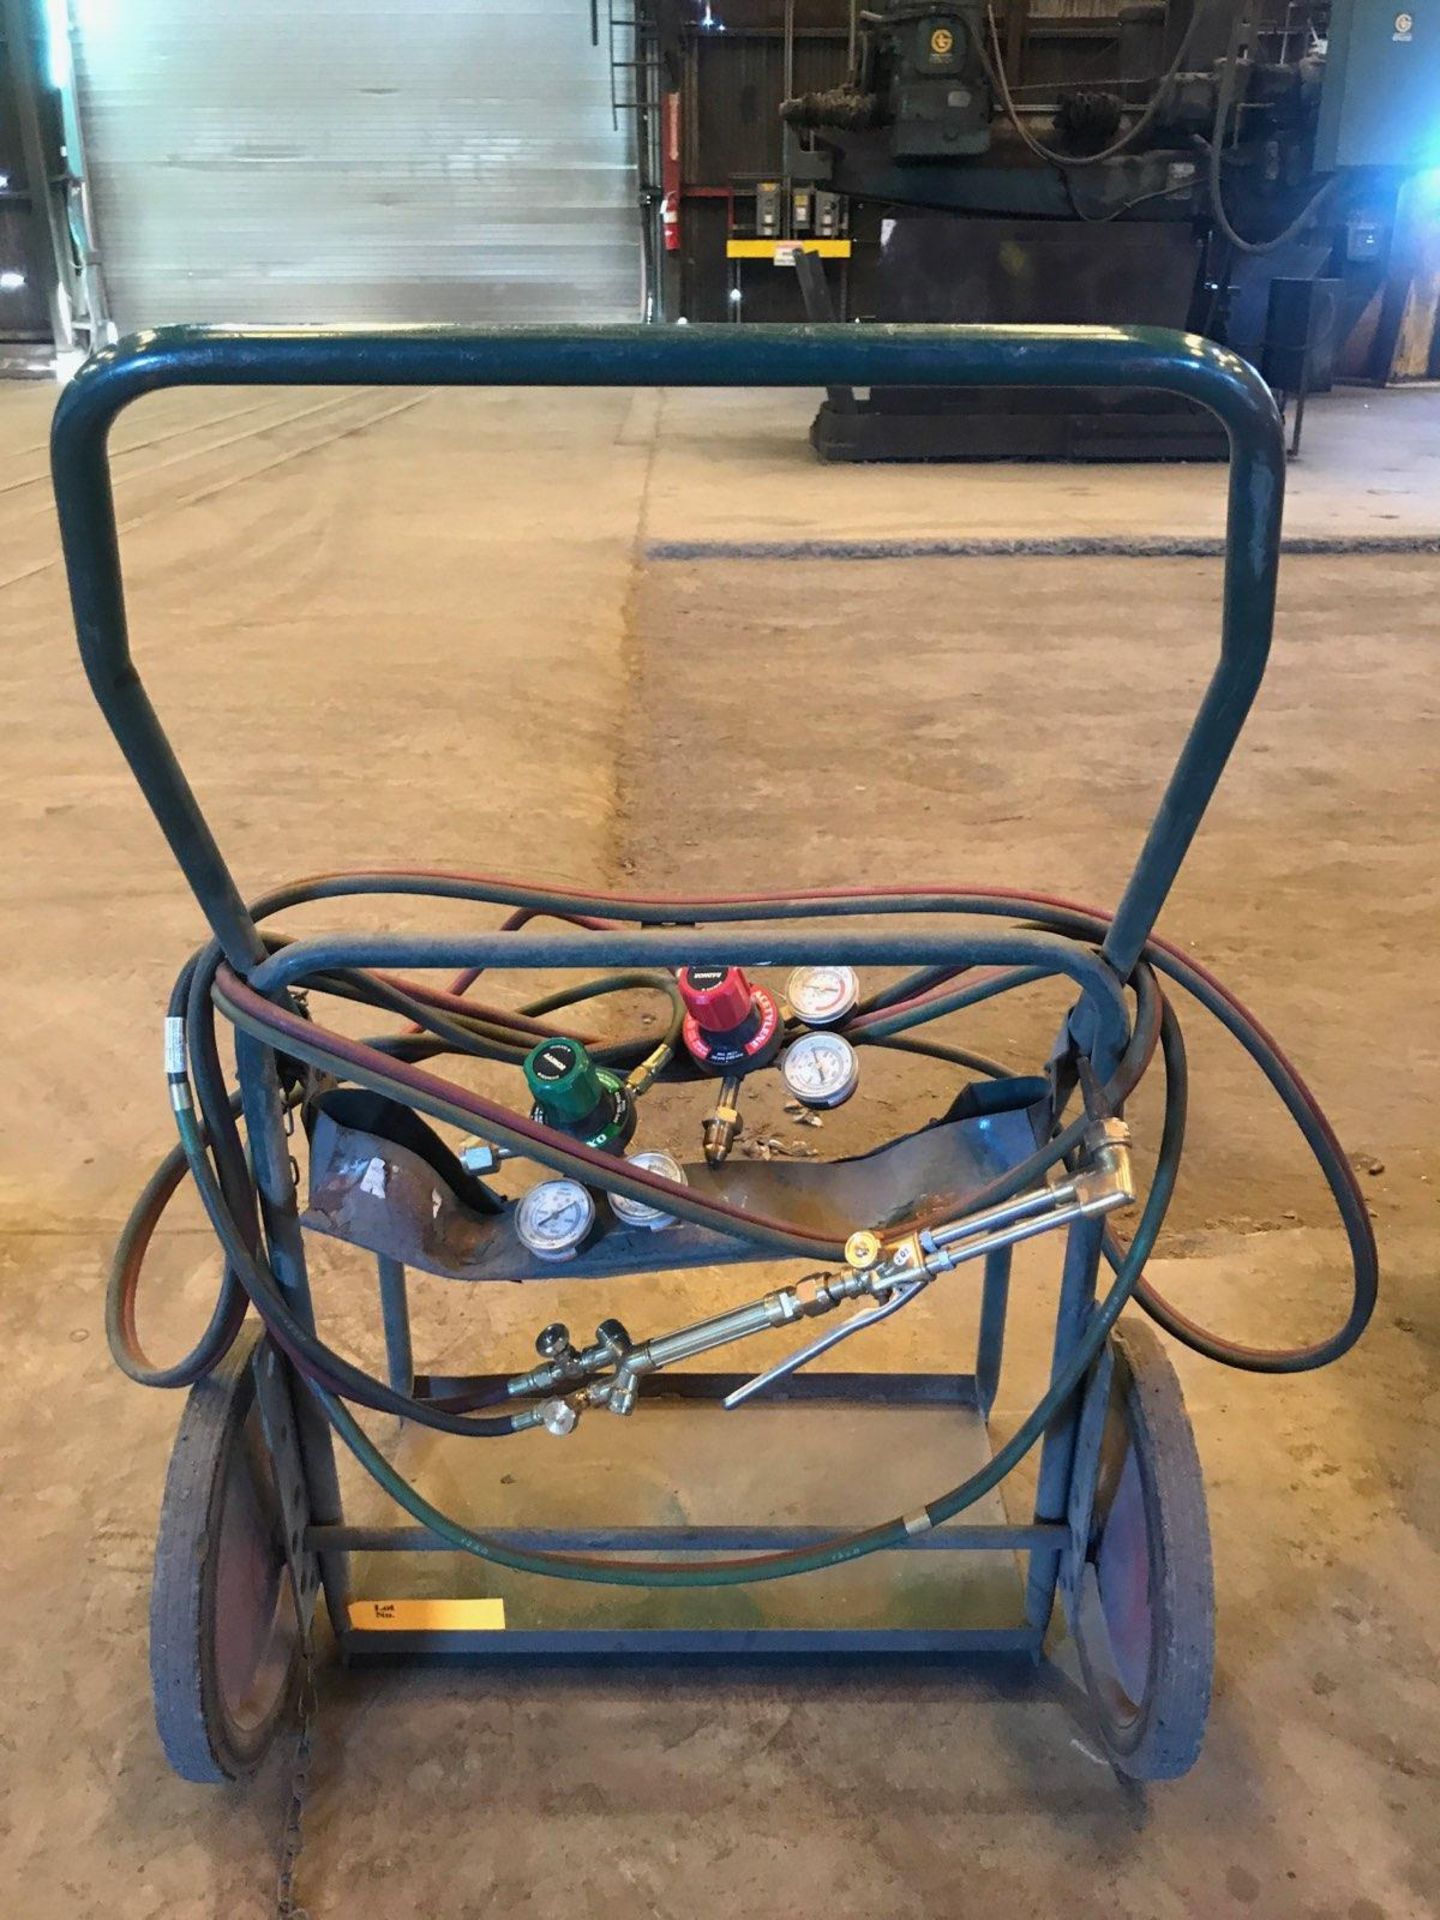 Oxygen/Acetylene Torch Set w/ Cart [Located at 8830 Vineyard Avenue, Rancho Cucamonga, CA 91730] - Image 2 of 2